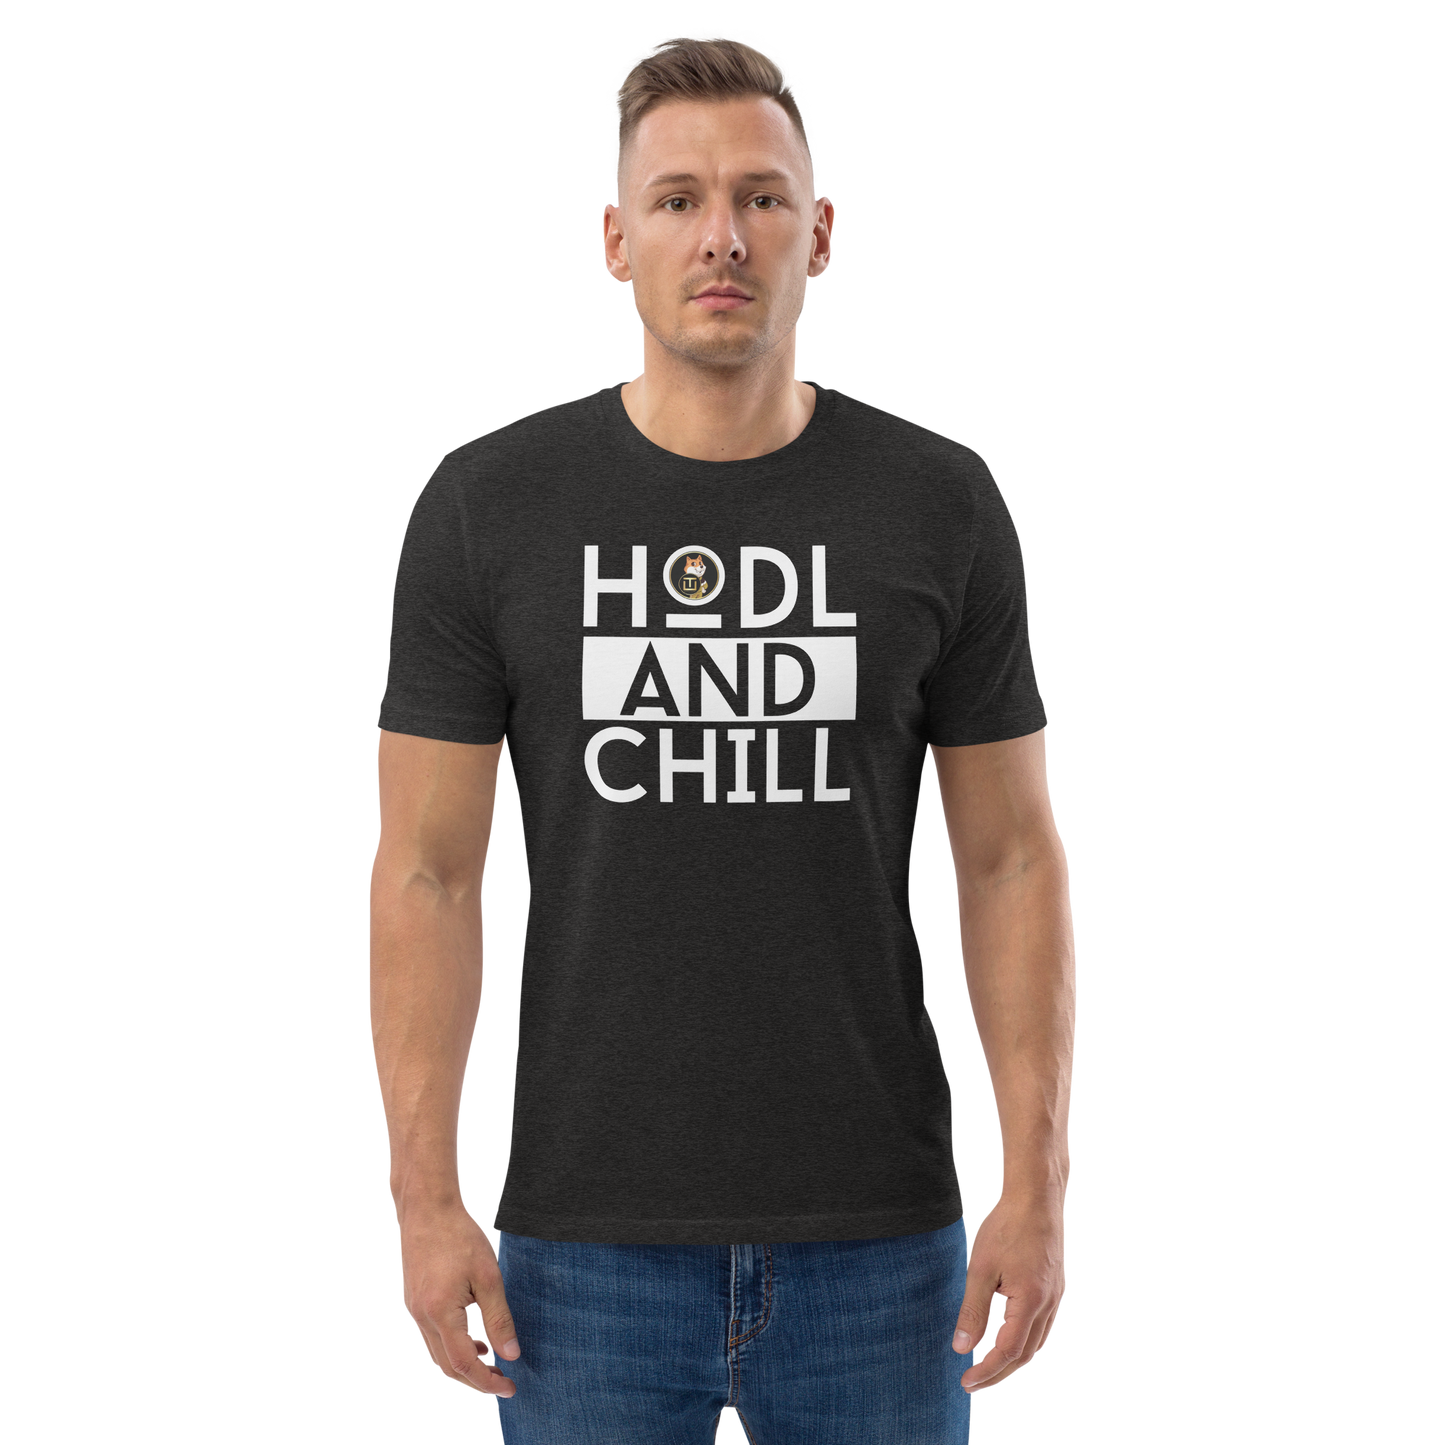 Son Of Doge 'Hodl And Chill' Men's organic cotton t-shirt